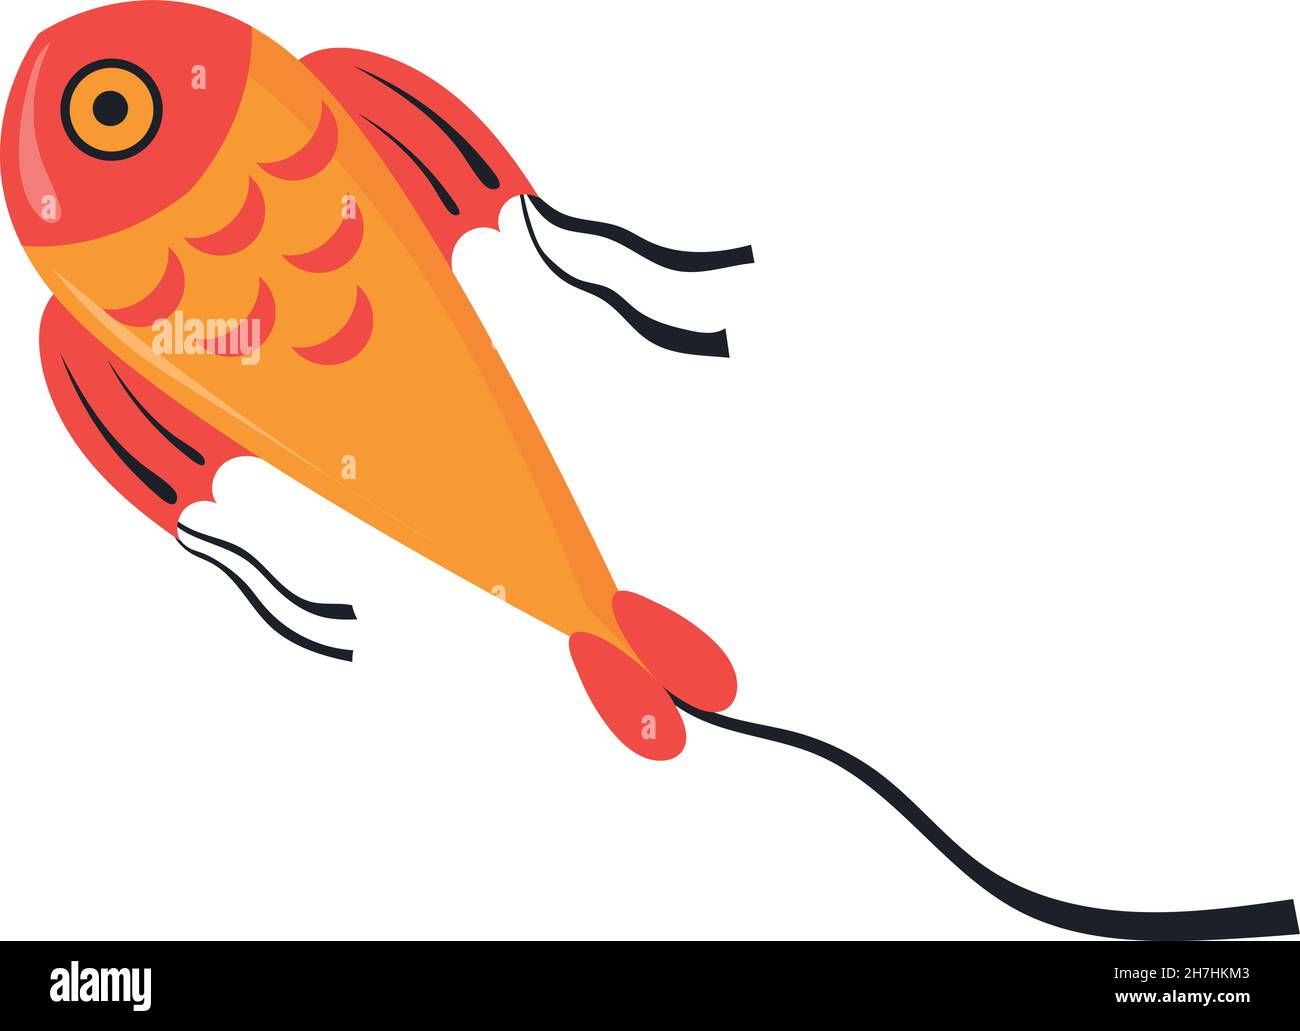 Fish kite. Outside activity game in cloud vector illustration isolated on white background Stock Vector